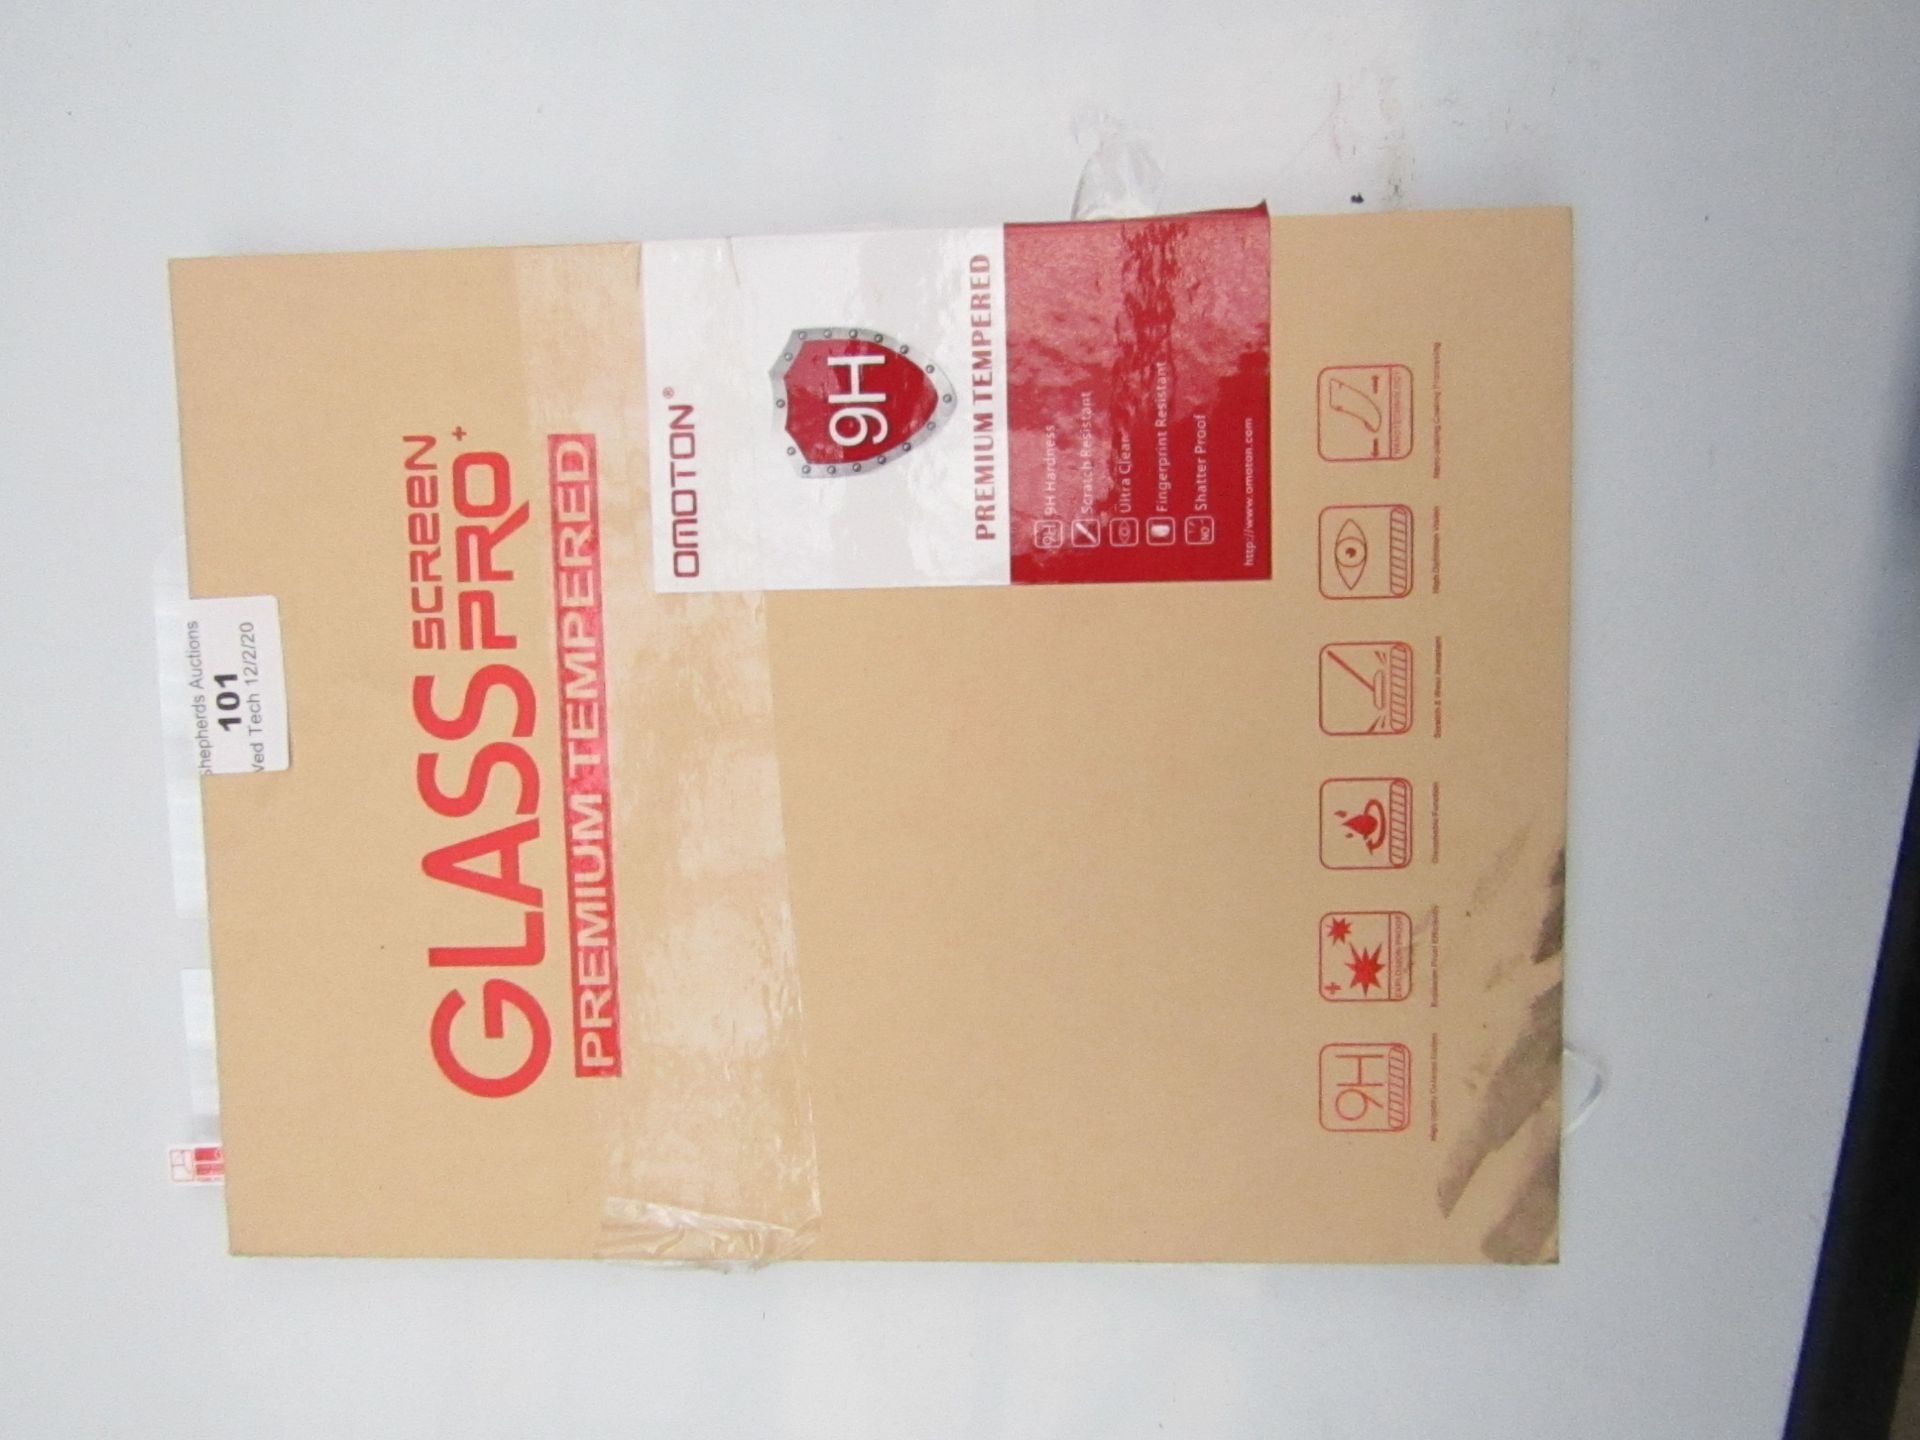 Glass Screen Pro premium tempered, unchecked and boxed.